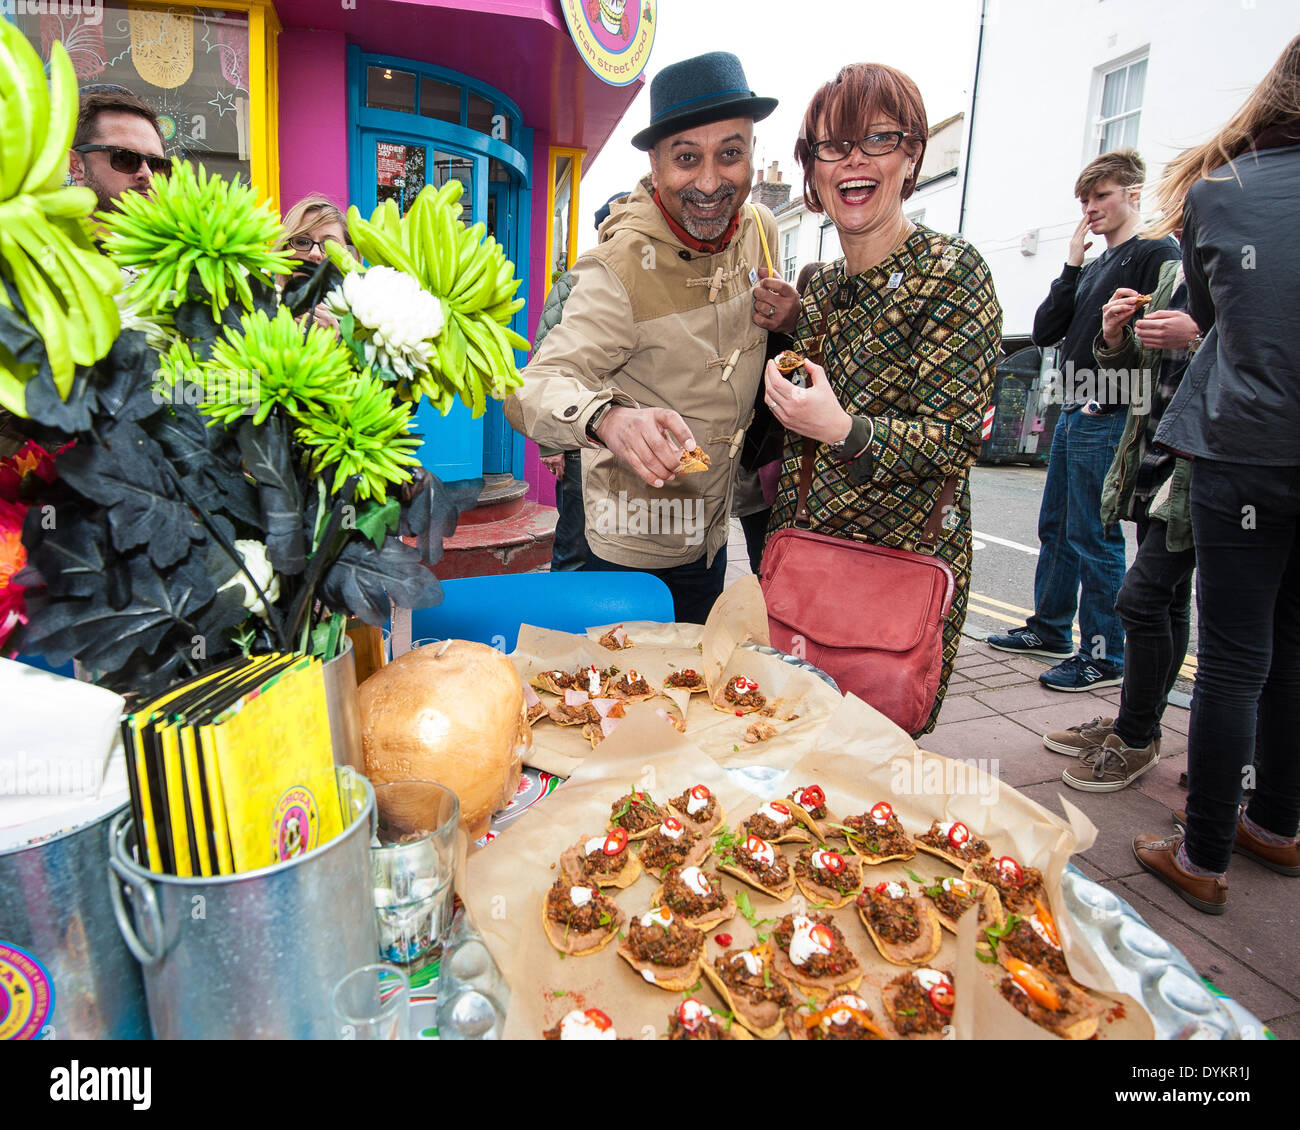 Brighton, UK. 21st April, 2014. Who can resisit the Tostadas at La Choza on Gloucester Road? Visitors on the Brighton & Hove Food and Drink Festival Food Trail in Brighton sample the delights of 10 local restaurants and bars whilst following the trail around The Lanes and North Laine of Brighton. Taking part were Aguadulce, Be At One, Boho Gelato, La Cave a Fromage, The Chilli Pickle, La Choza, Moshimo, Julien Plumart, The Manor, Yum Yum Ninja. photo Credit: Julia Claxton/Alamy Live News Stock Photo